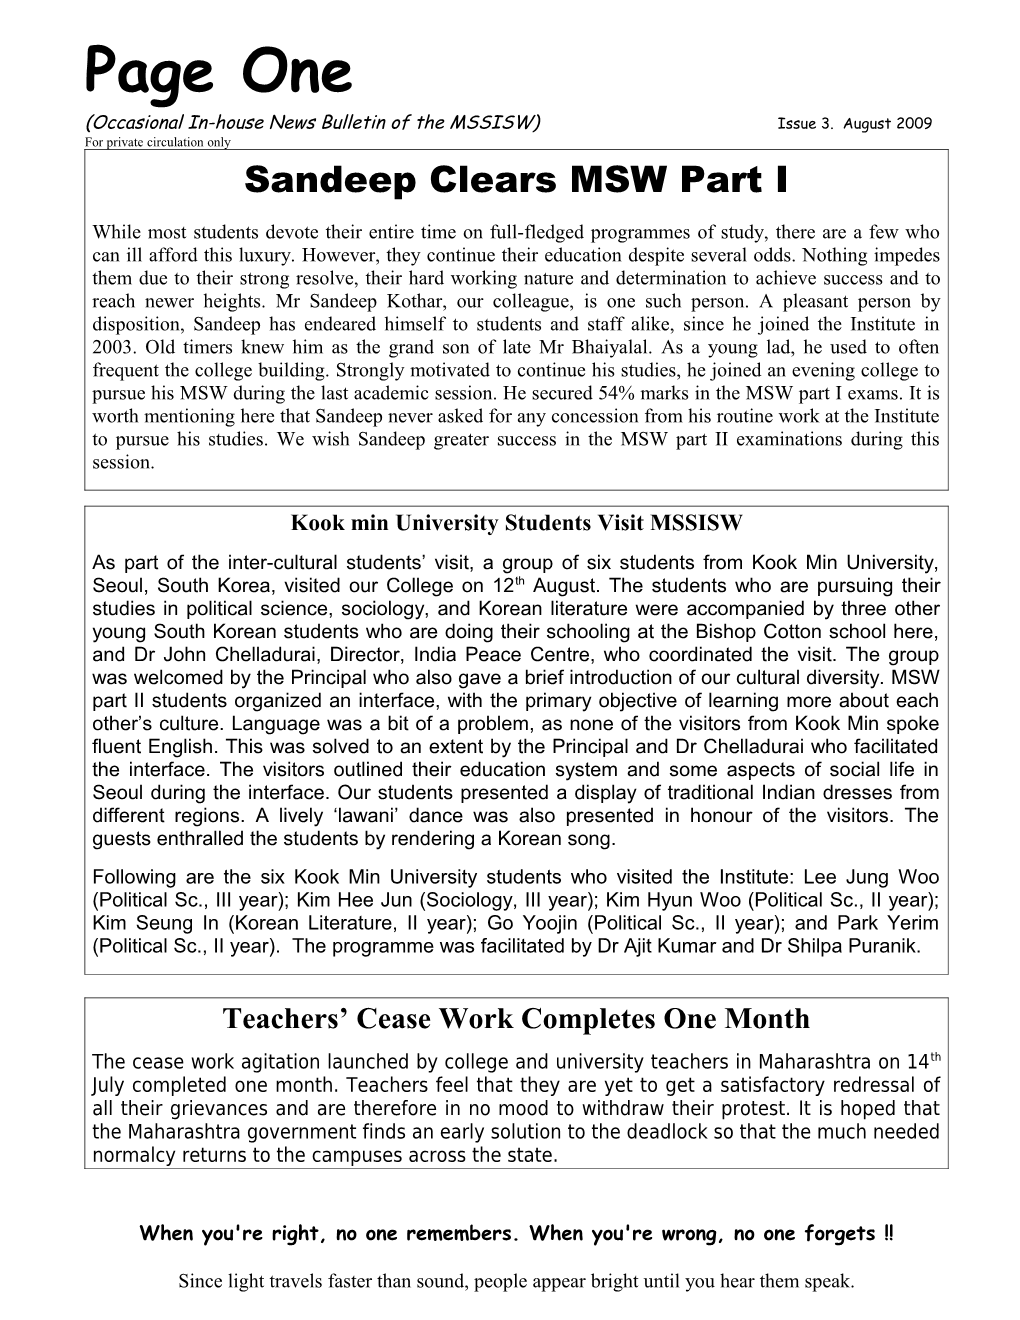 Sandeep Clears MSW Part I